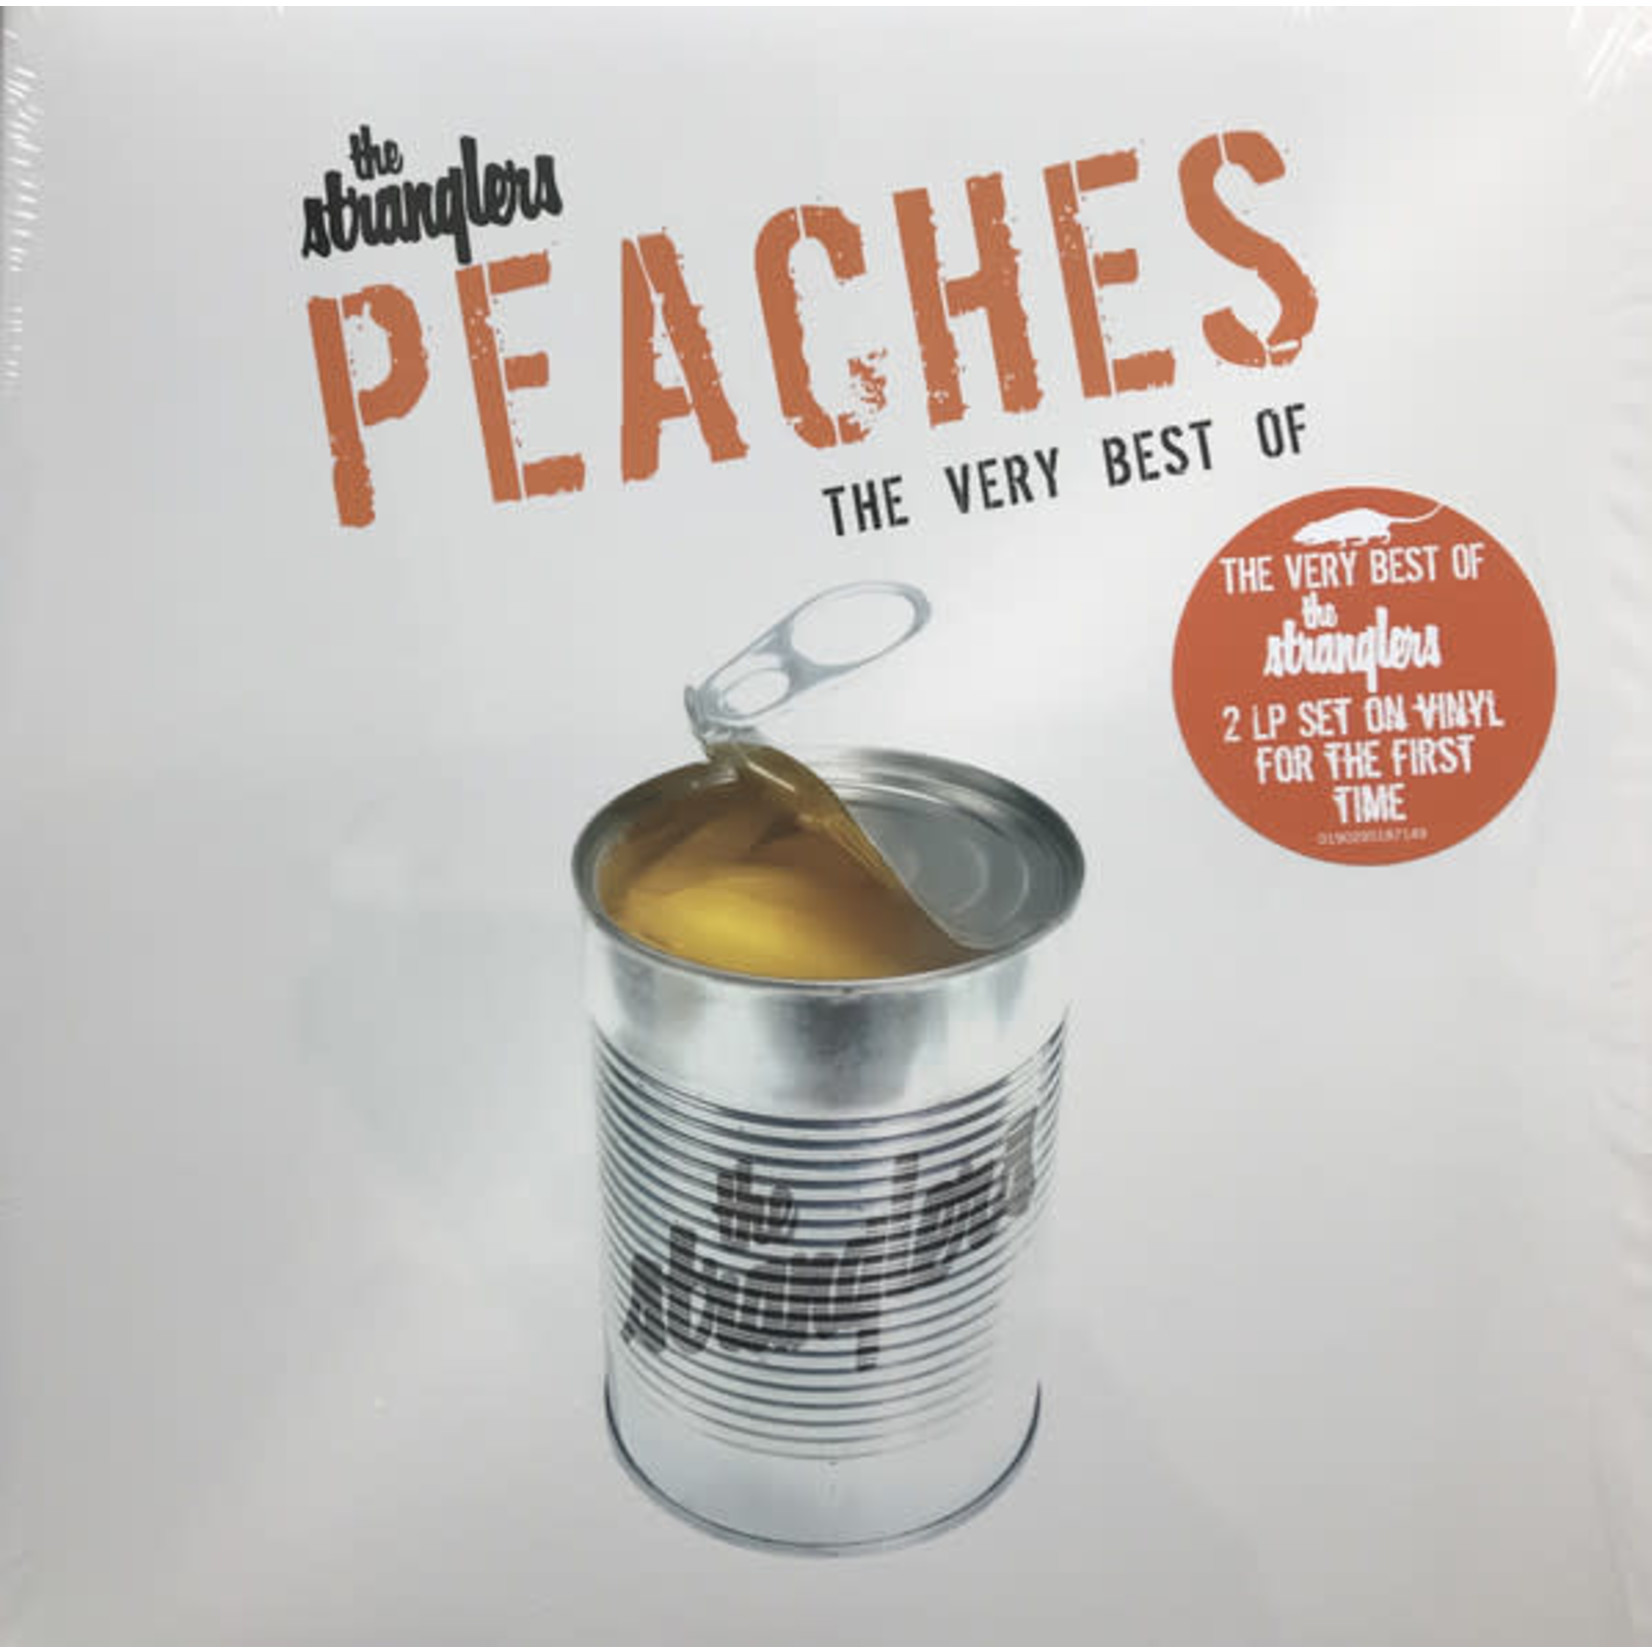 [New] Stranglers, The: Peaches: The Very Best Of The Stranglers (2LP) [WARNER]